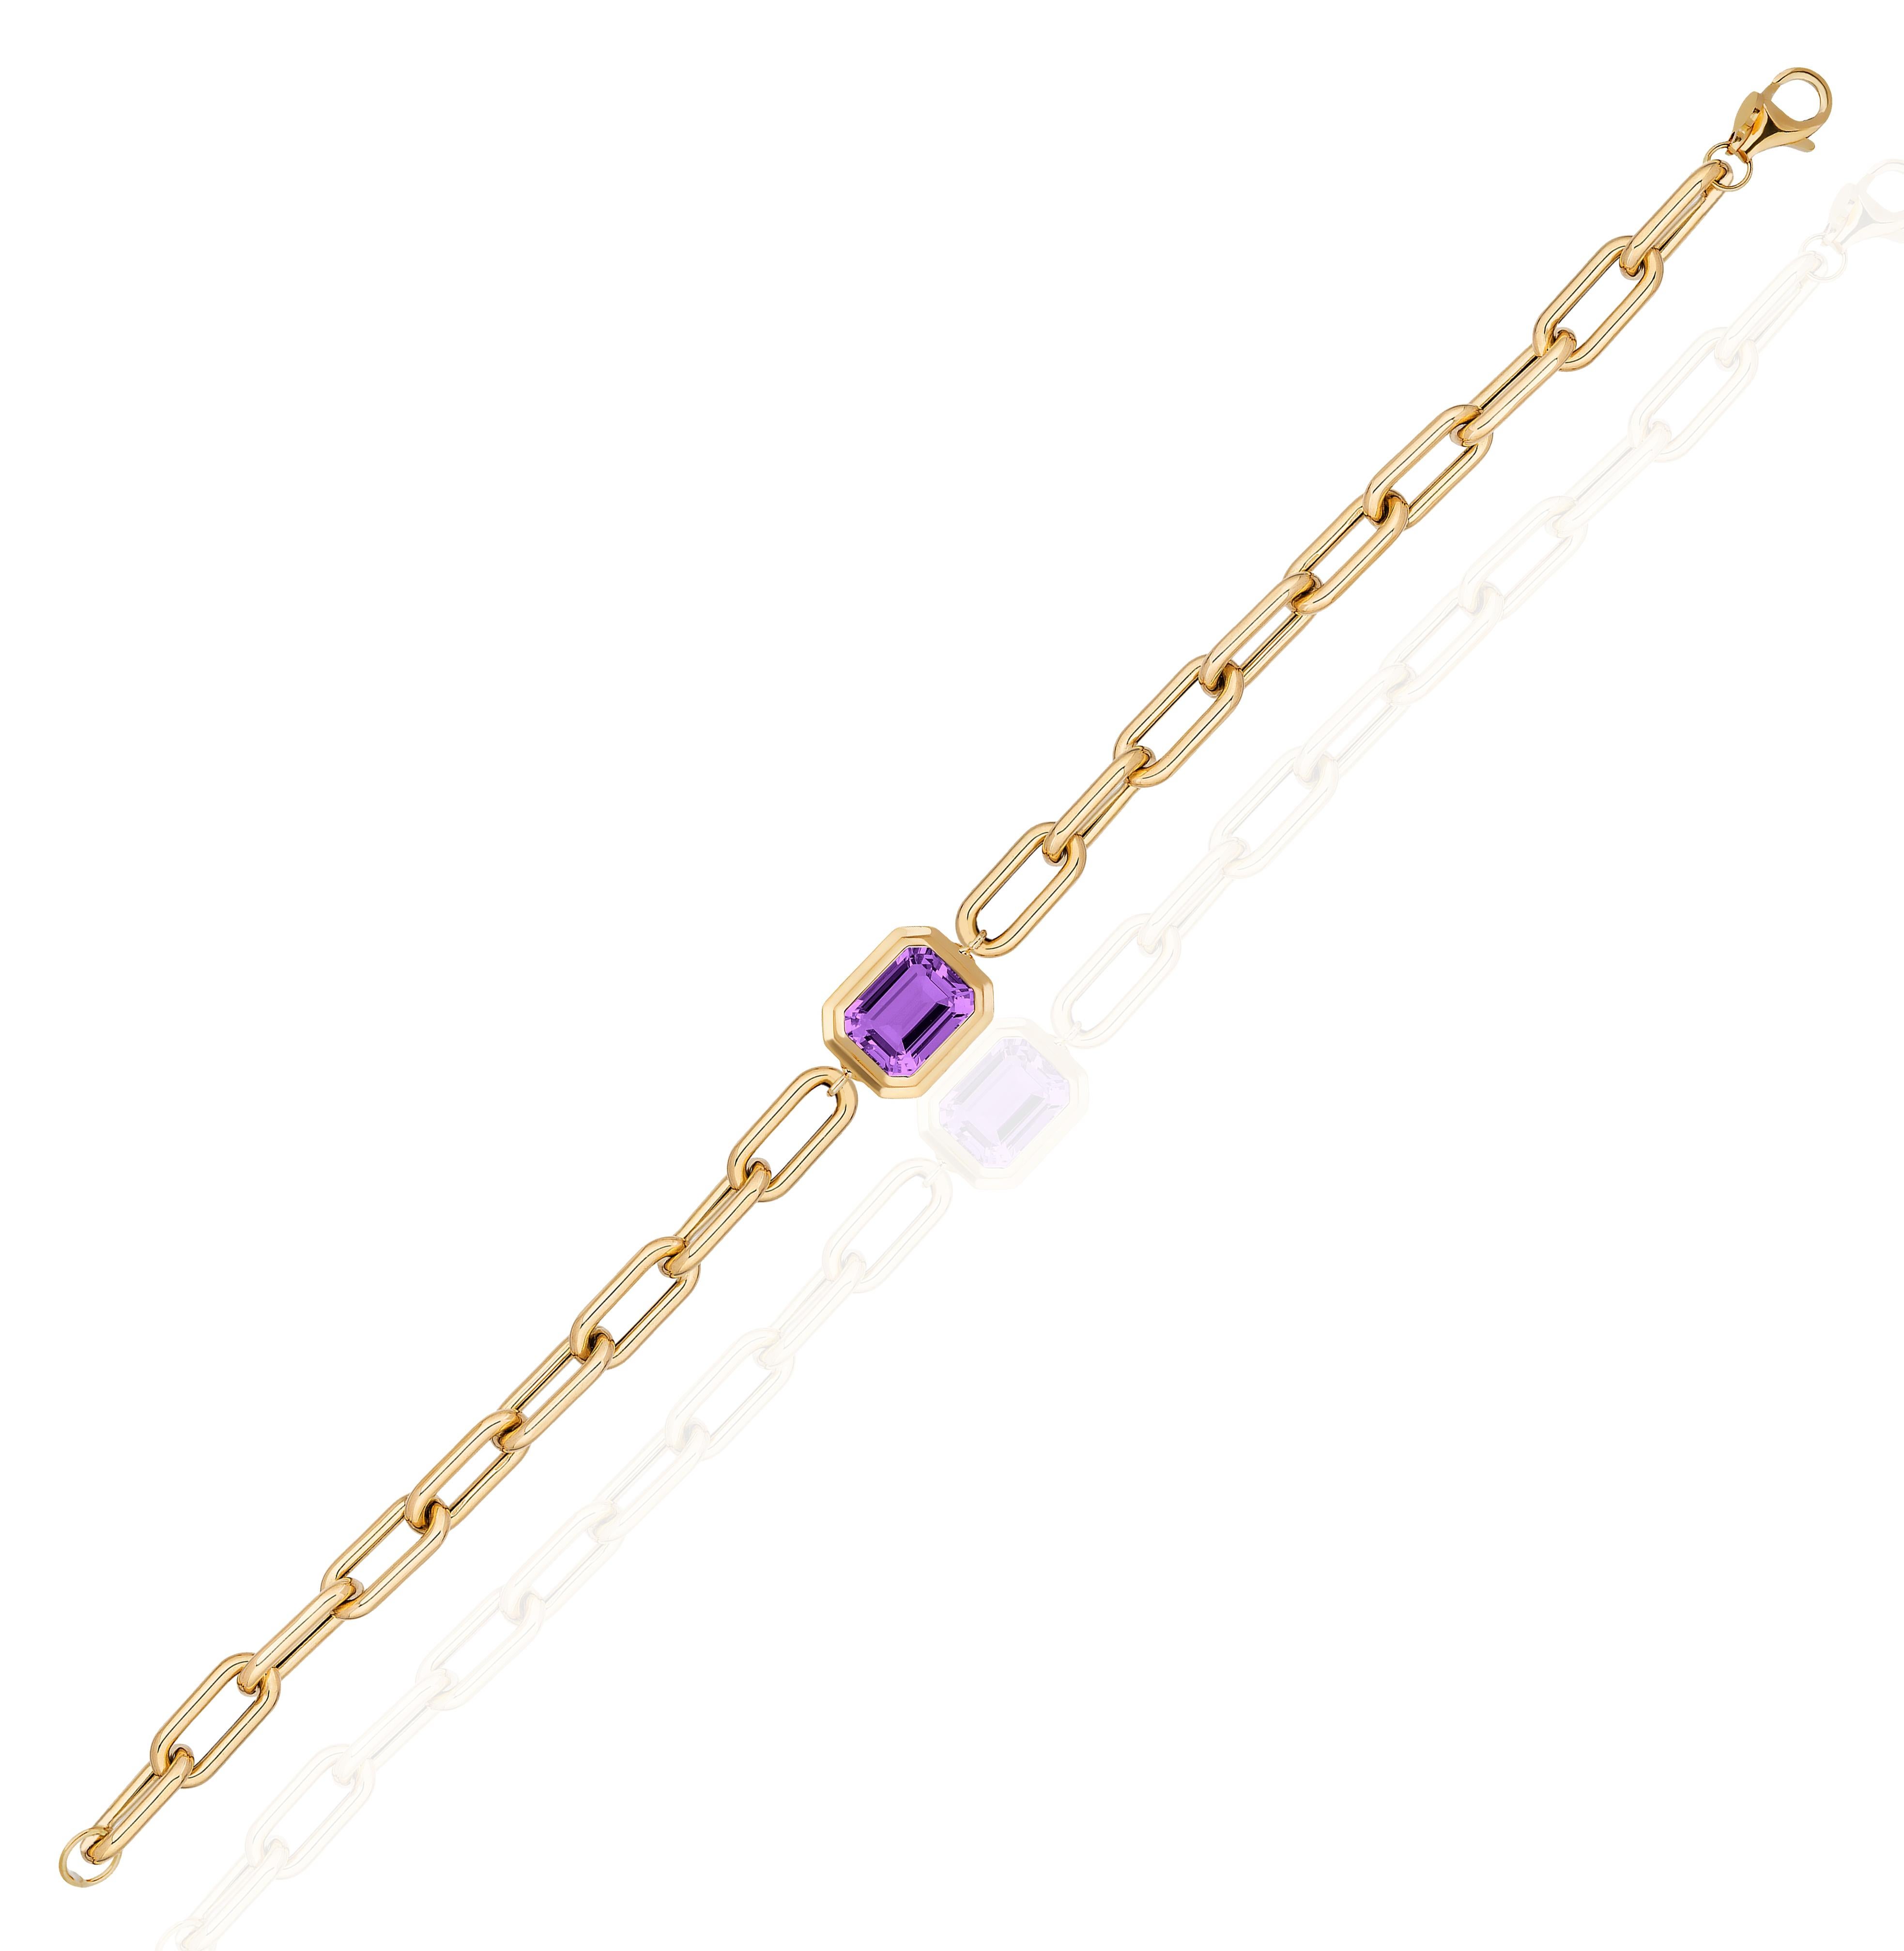 Elevate your style with the Amethyst Emerald Cut Bezel Set Bracelet in 18K Yellow Gold from our captivating 'Manhattan' Collection. Merging minimalist elegance with confident design, this bracelet captures the essence of New York City's iconic